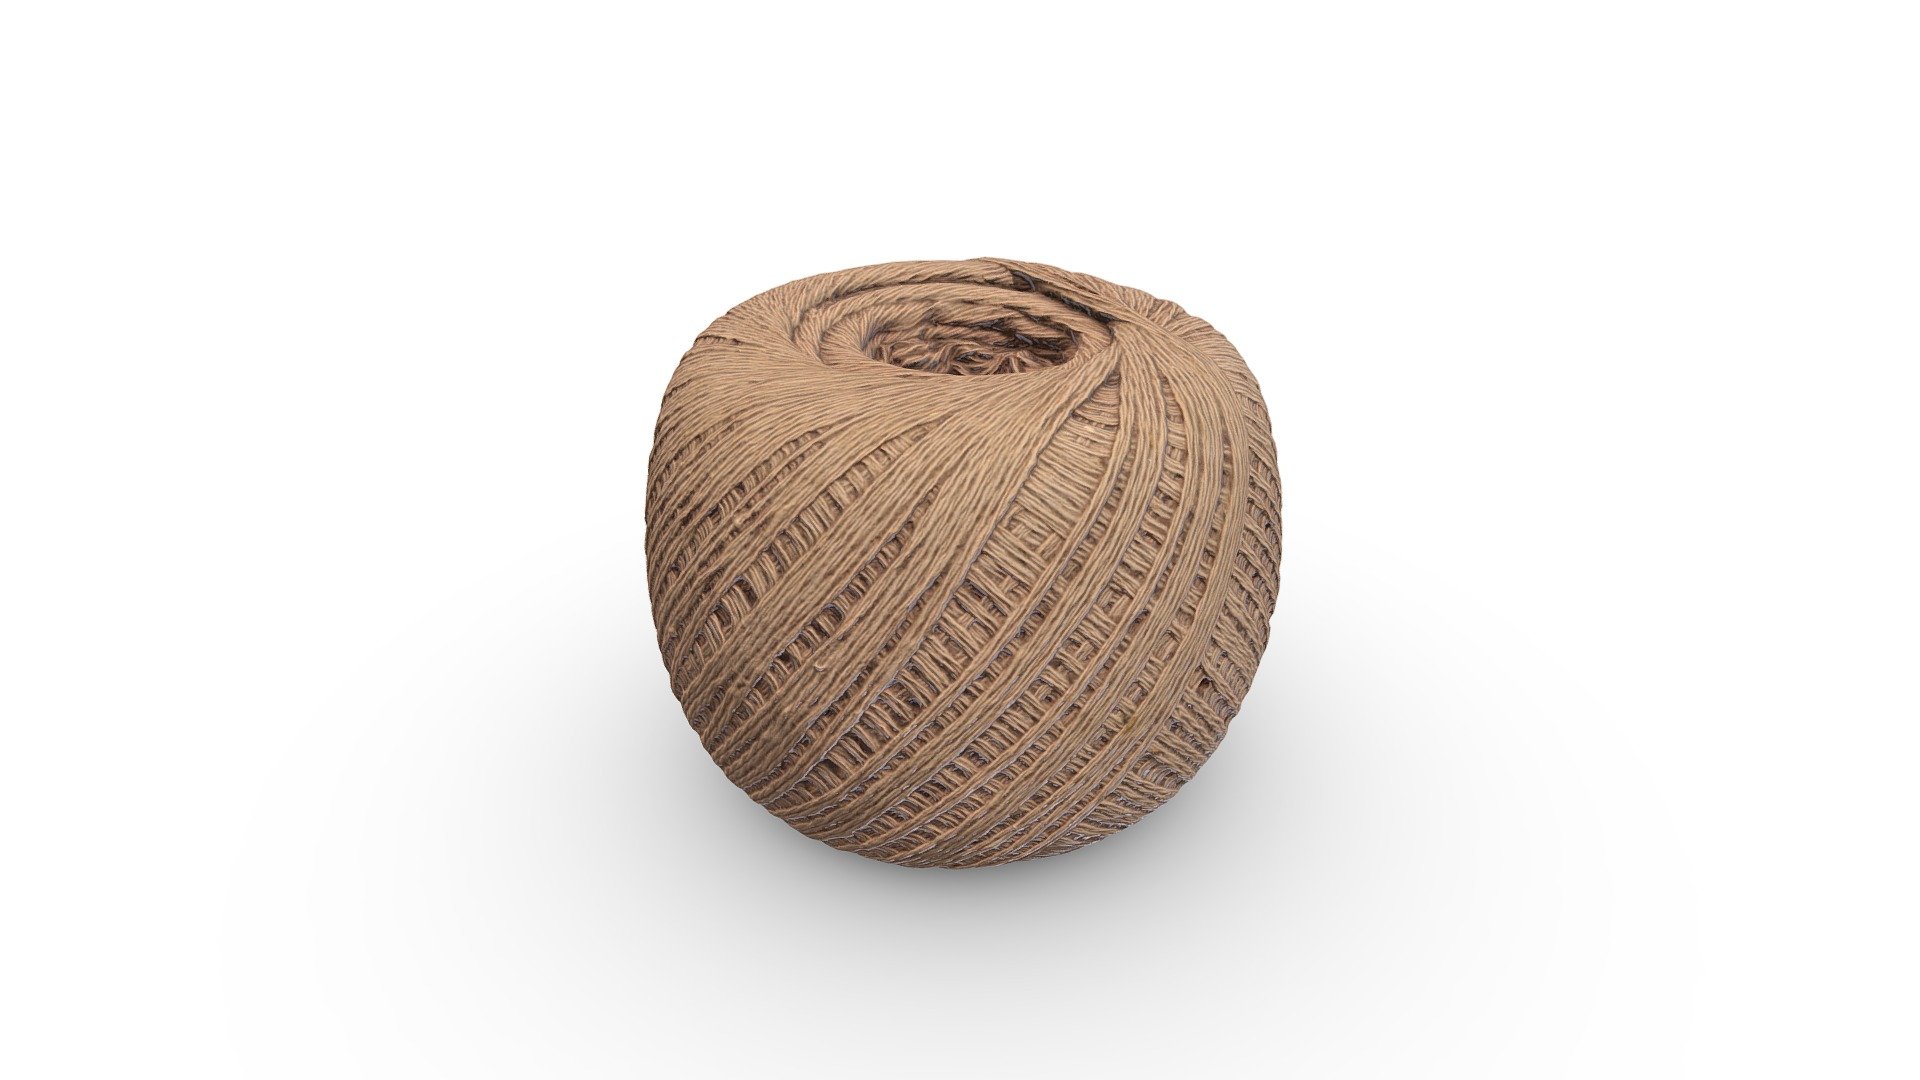 High-poly brown ball of thread photogrammetry scan. PBR texture maps 4096x4096 px. resolution for metallic or specular workflow. Scan from real thread, high-poly 3D model, 4K resolution textures.

Additional file contains low-poly 3d model version, game-ready in real time 3d model